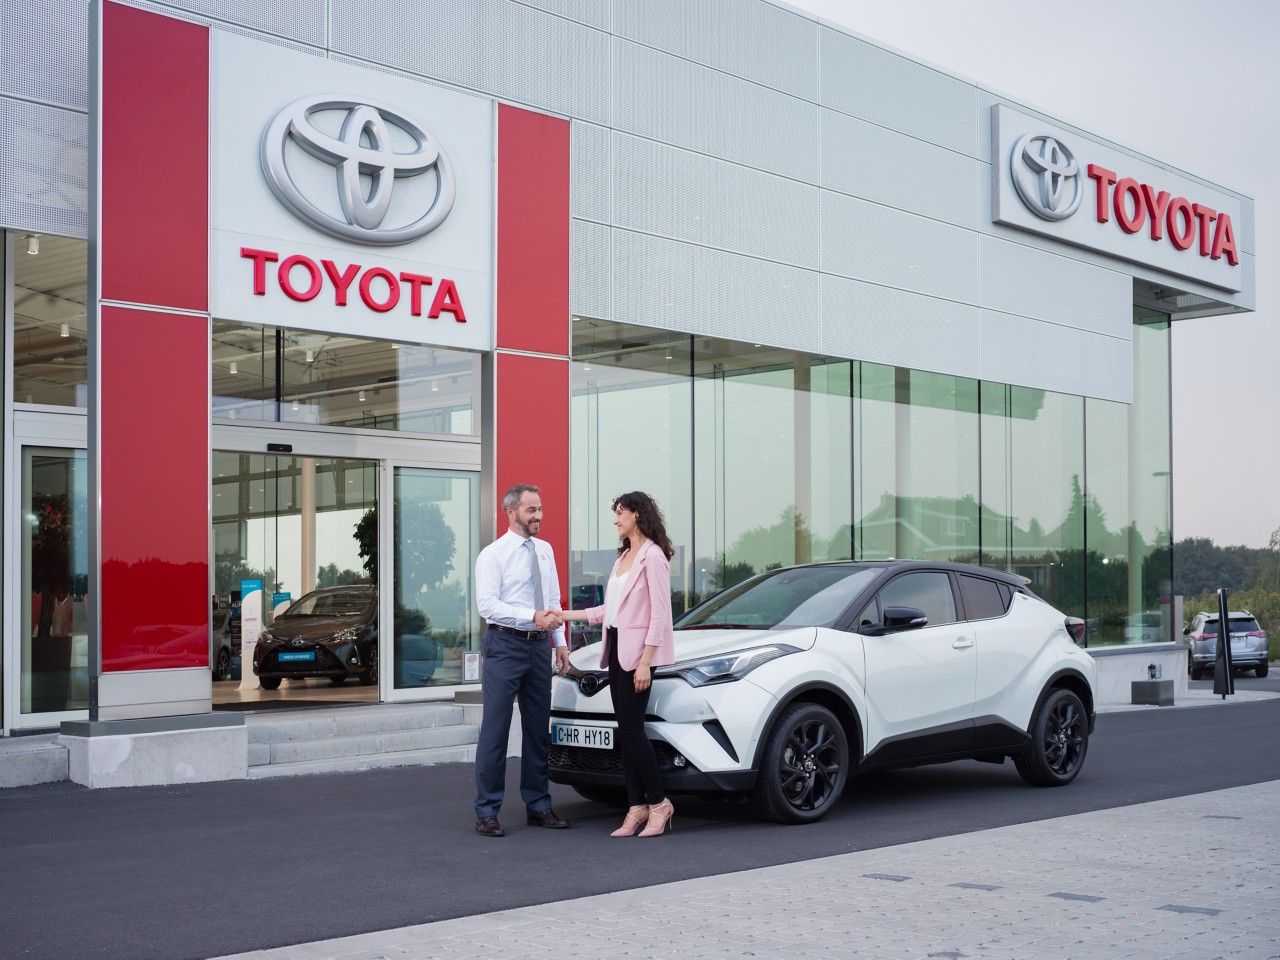 Toyota dealer and customer in front of a retailer shop